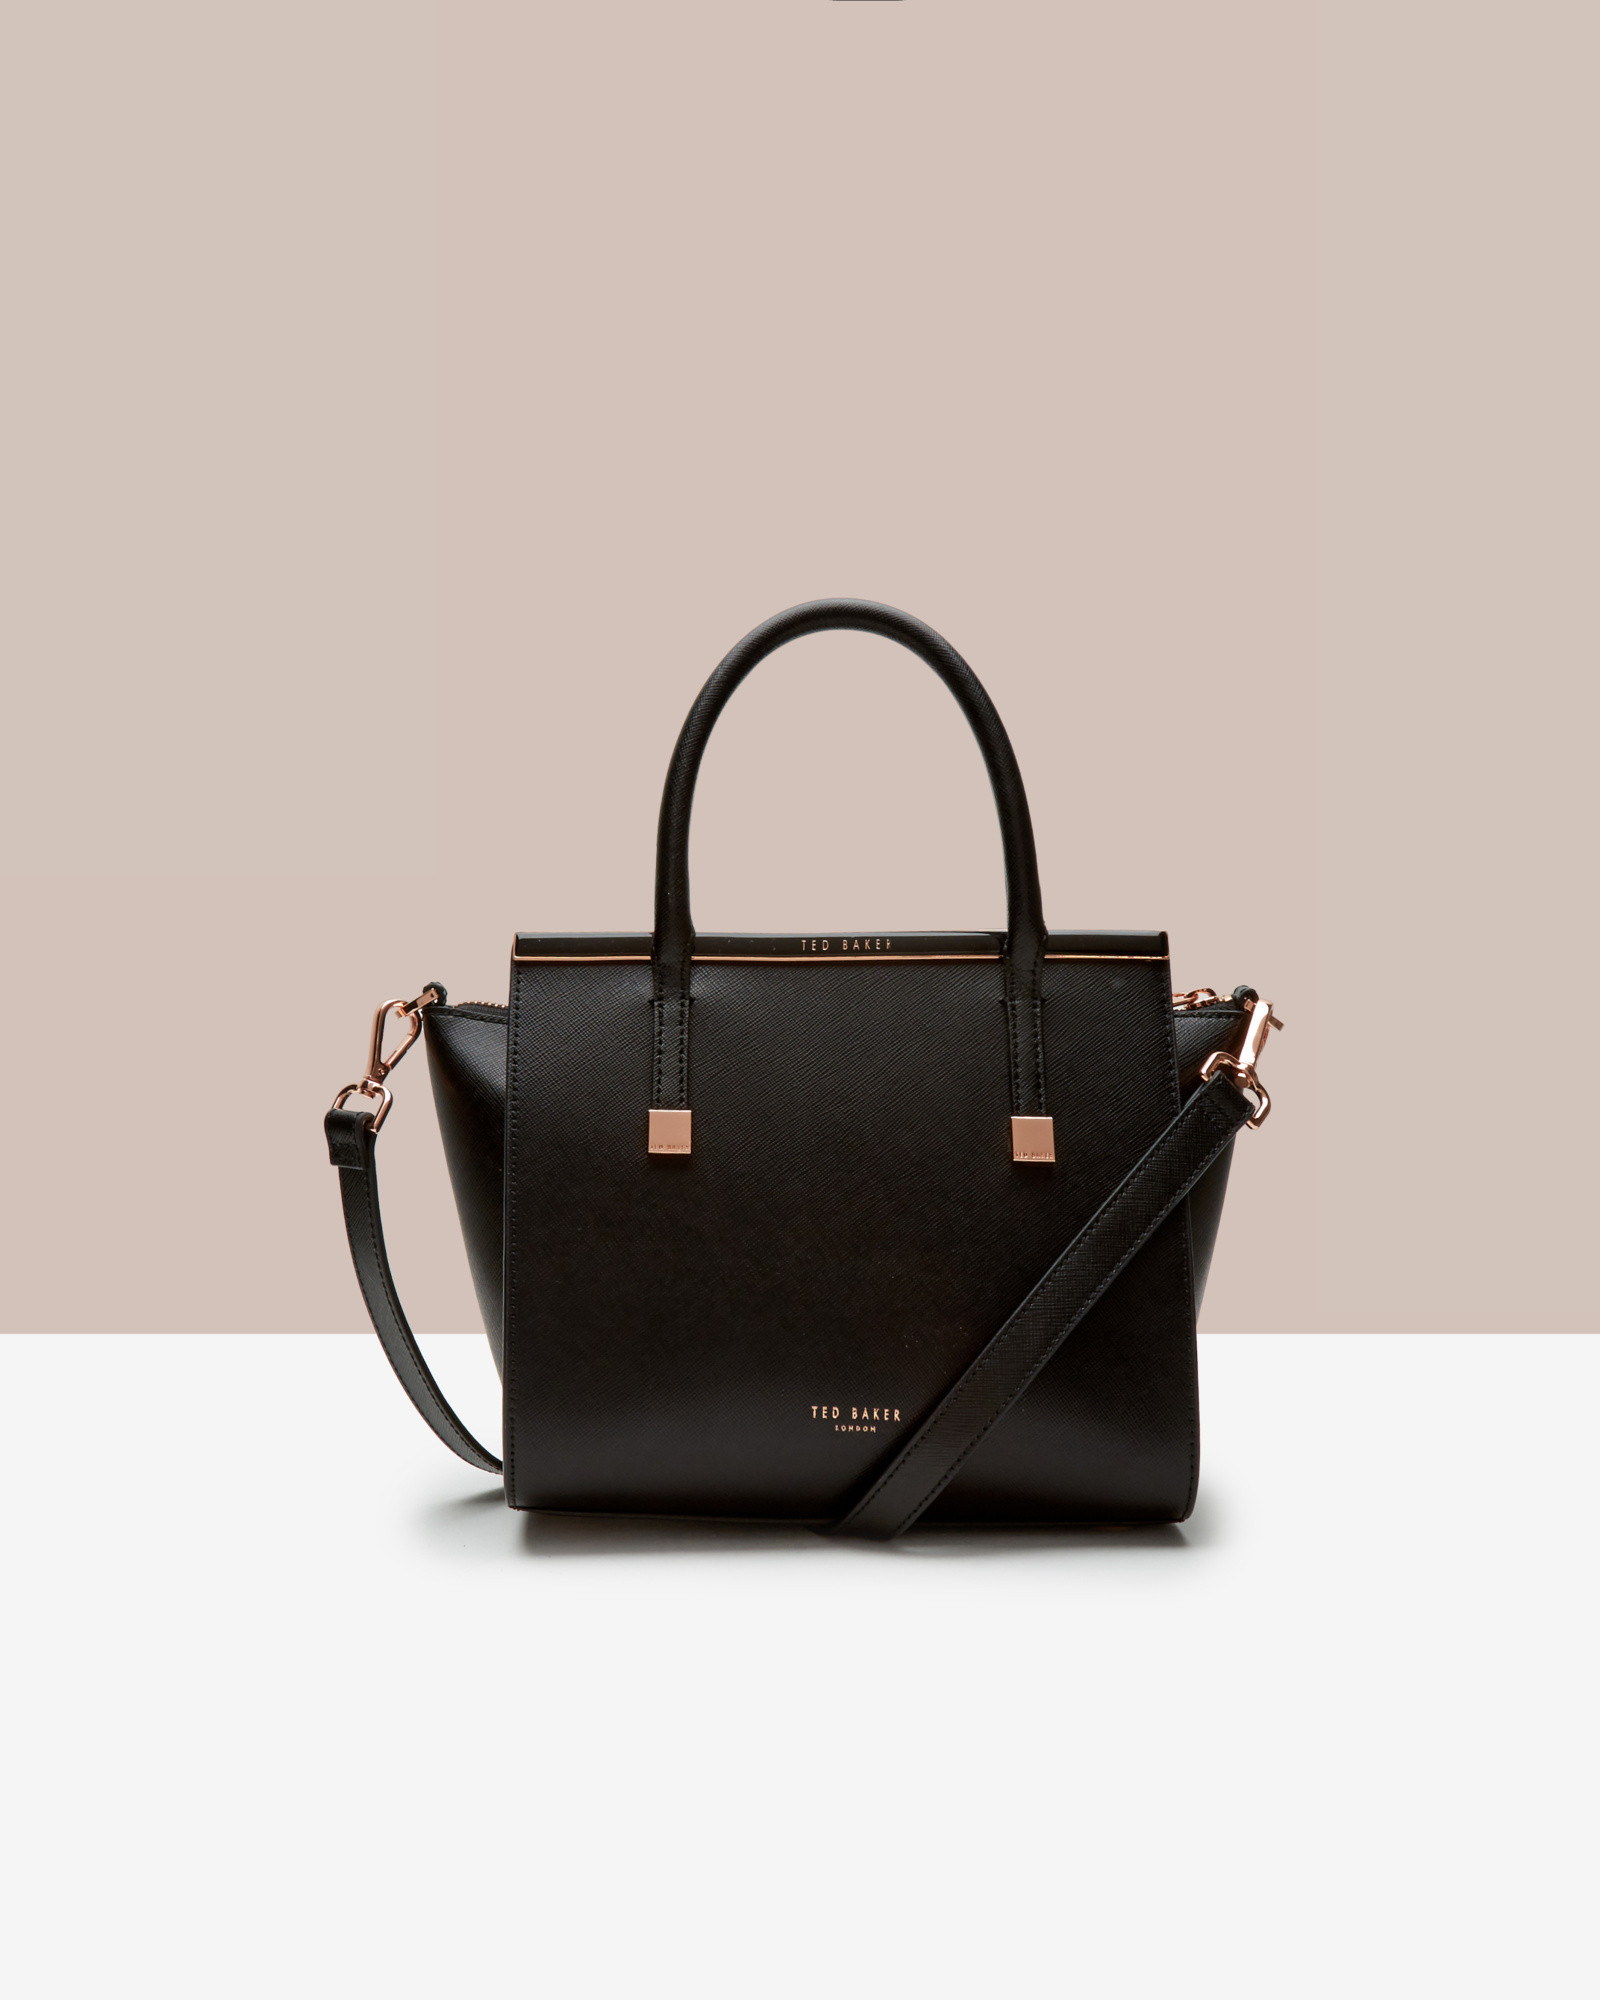 Lyst - Ted Baker Crosshatch Leather Tote Bag in Black